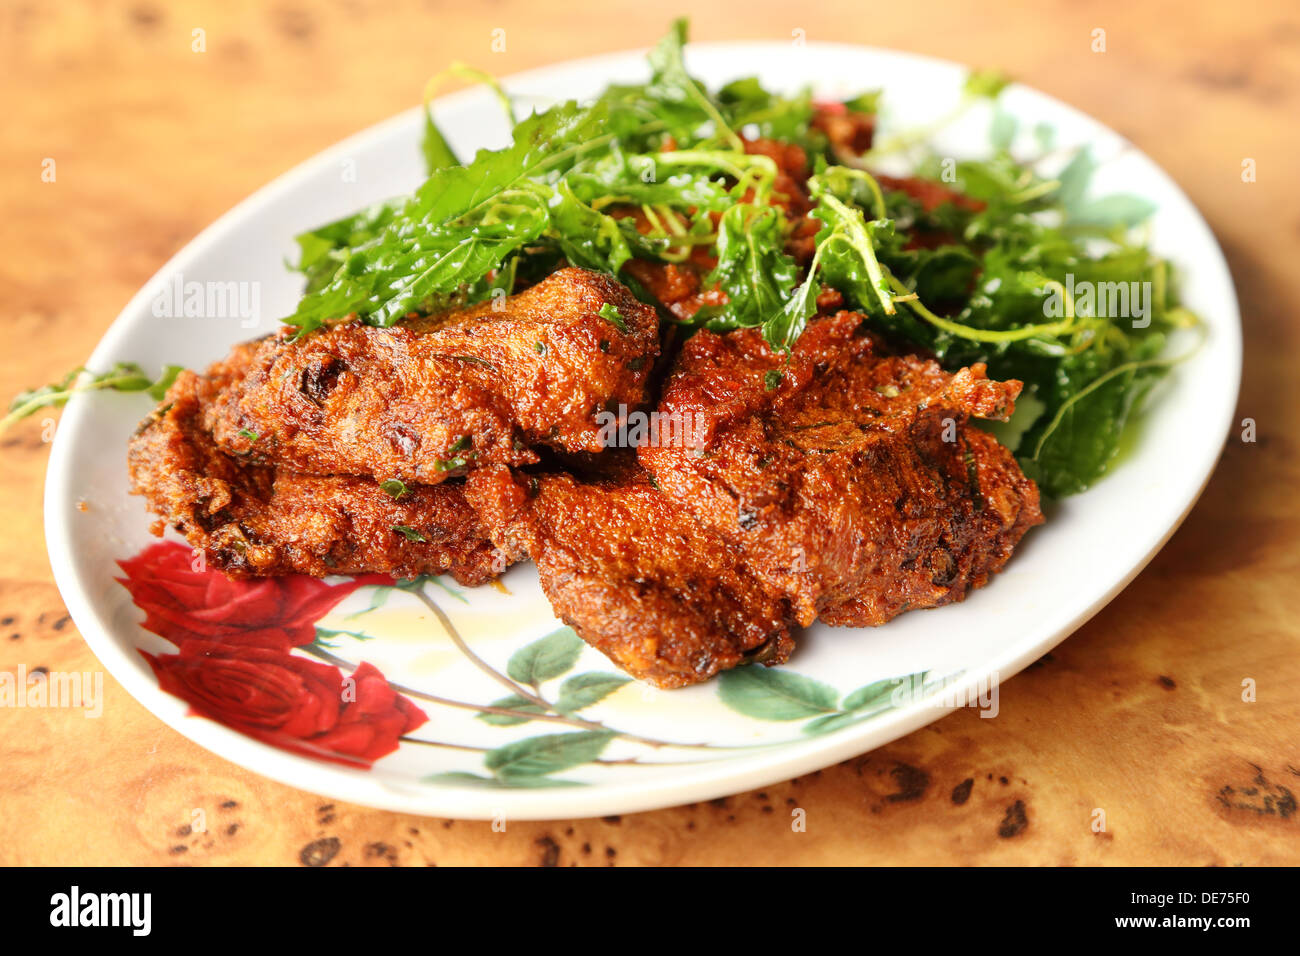 plate of Deep-fried curried fish patties Stock Photo